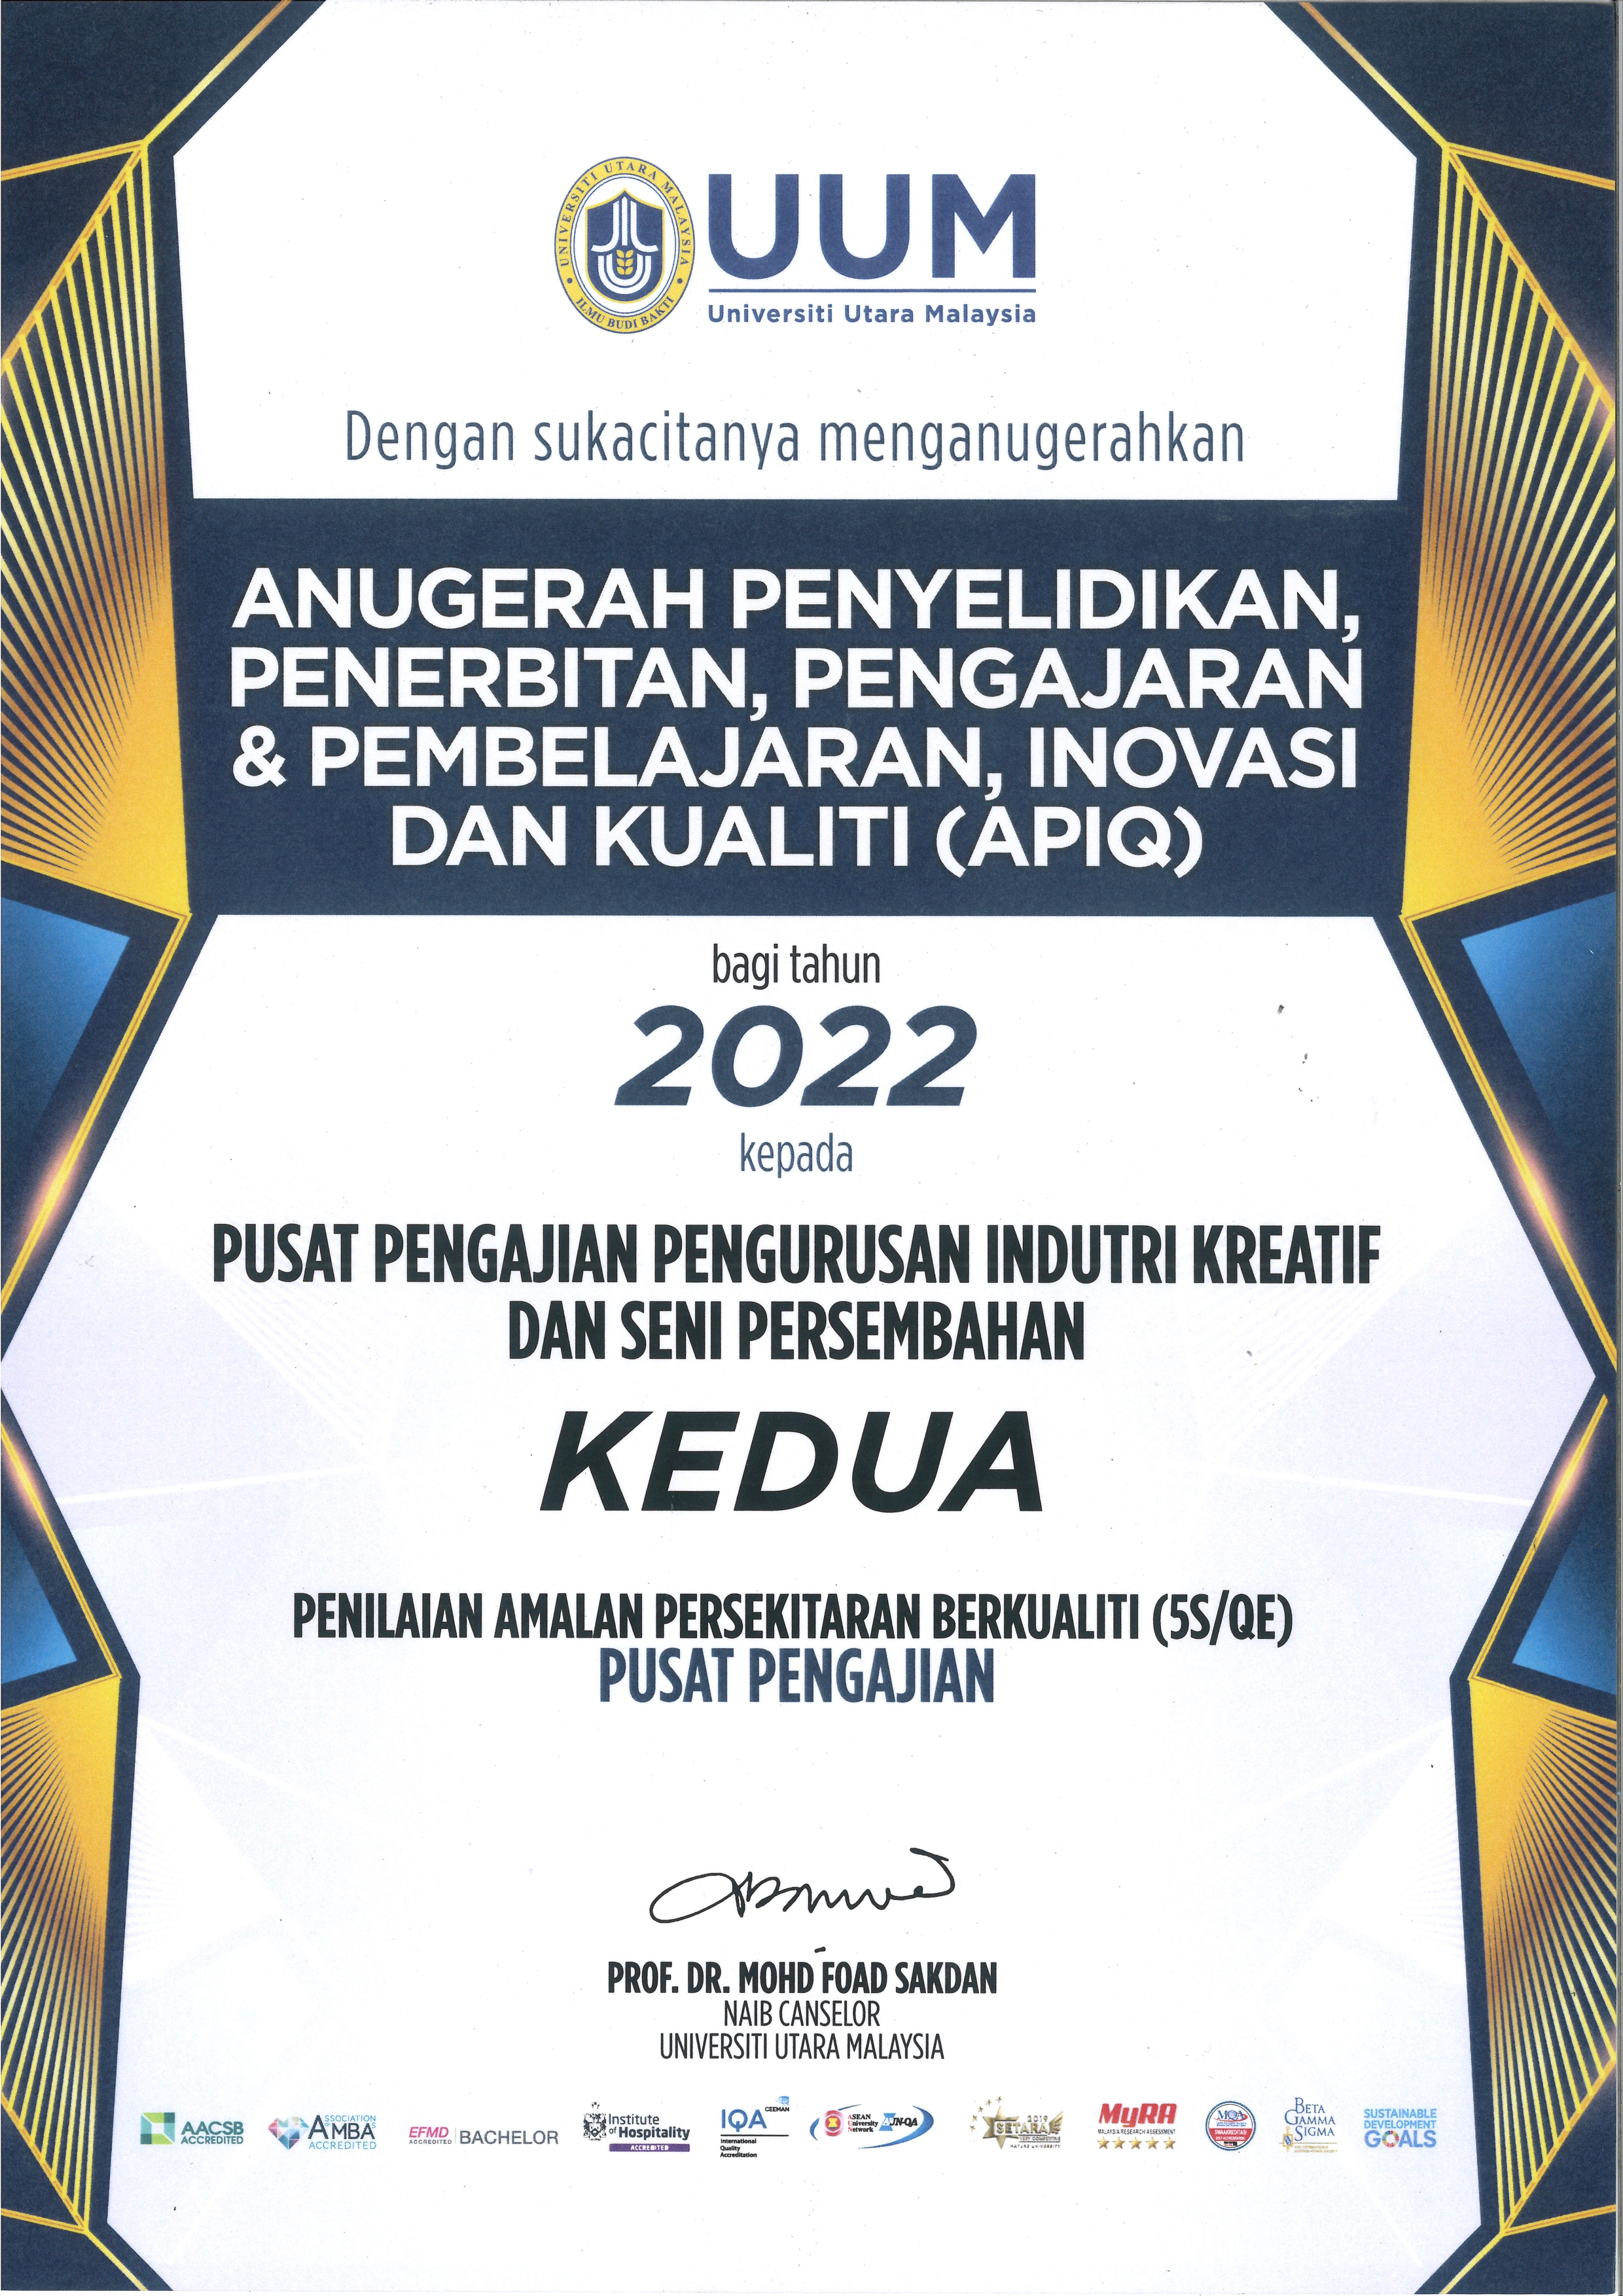 Research, Publication, Teaching & Learning, Innovation and Quality (APIQ) Awards 2022